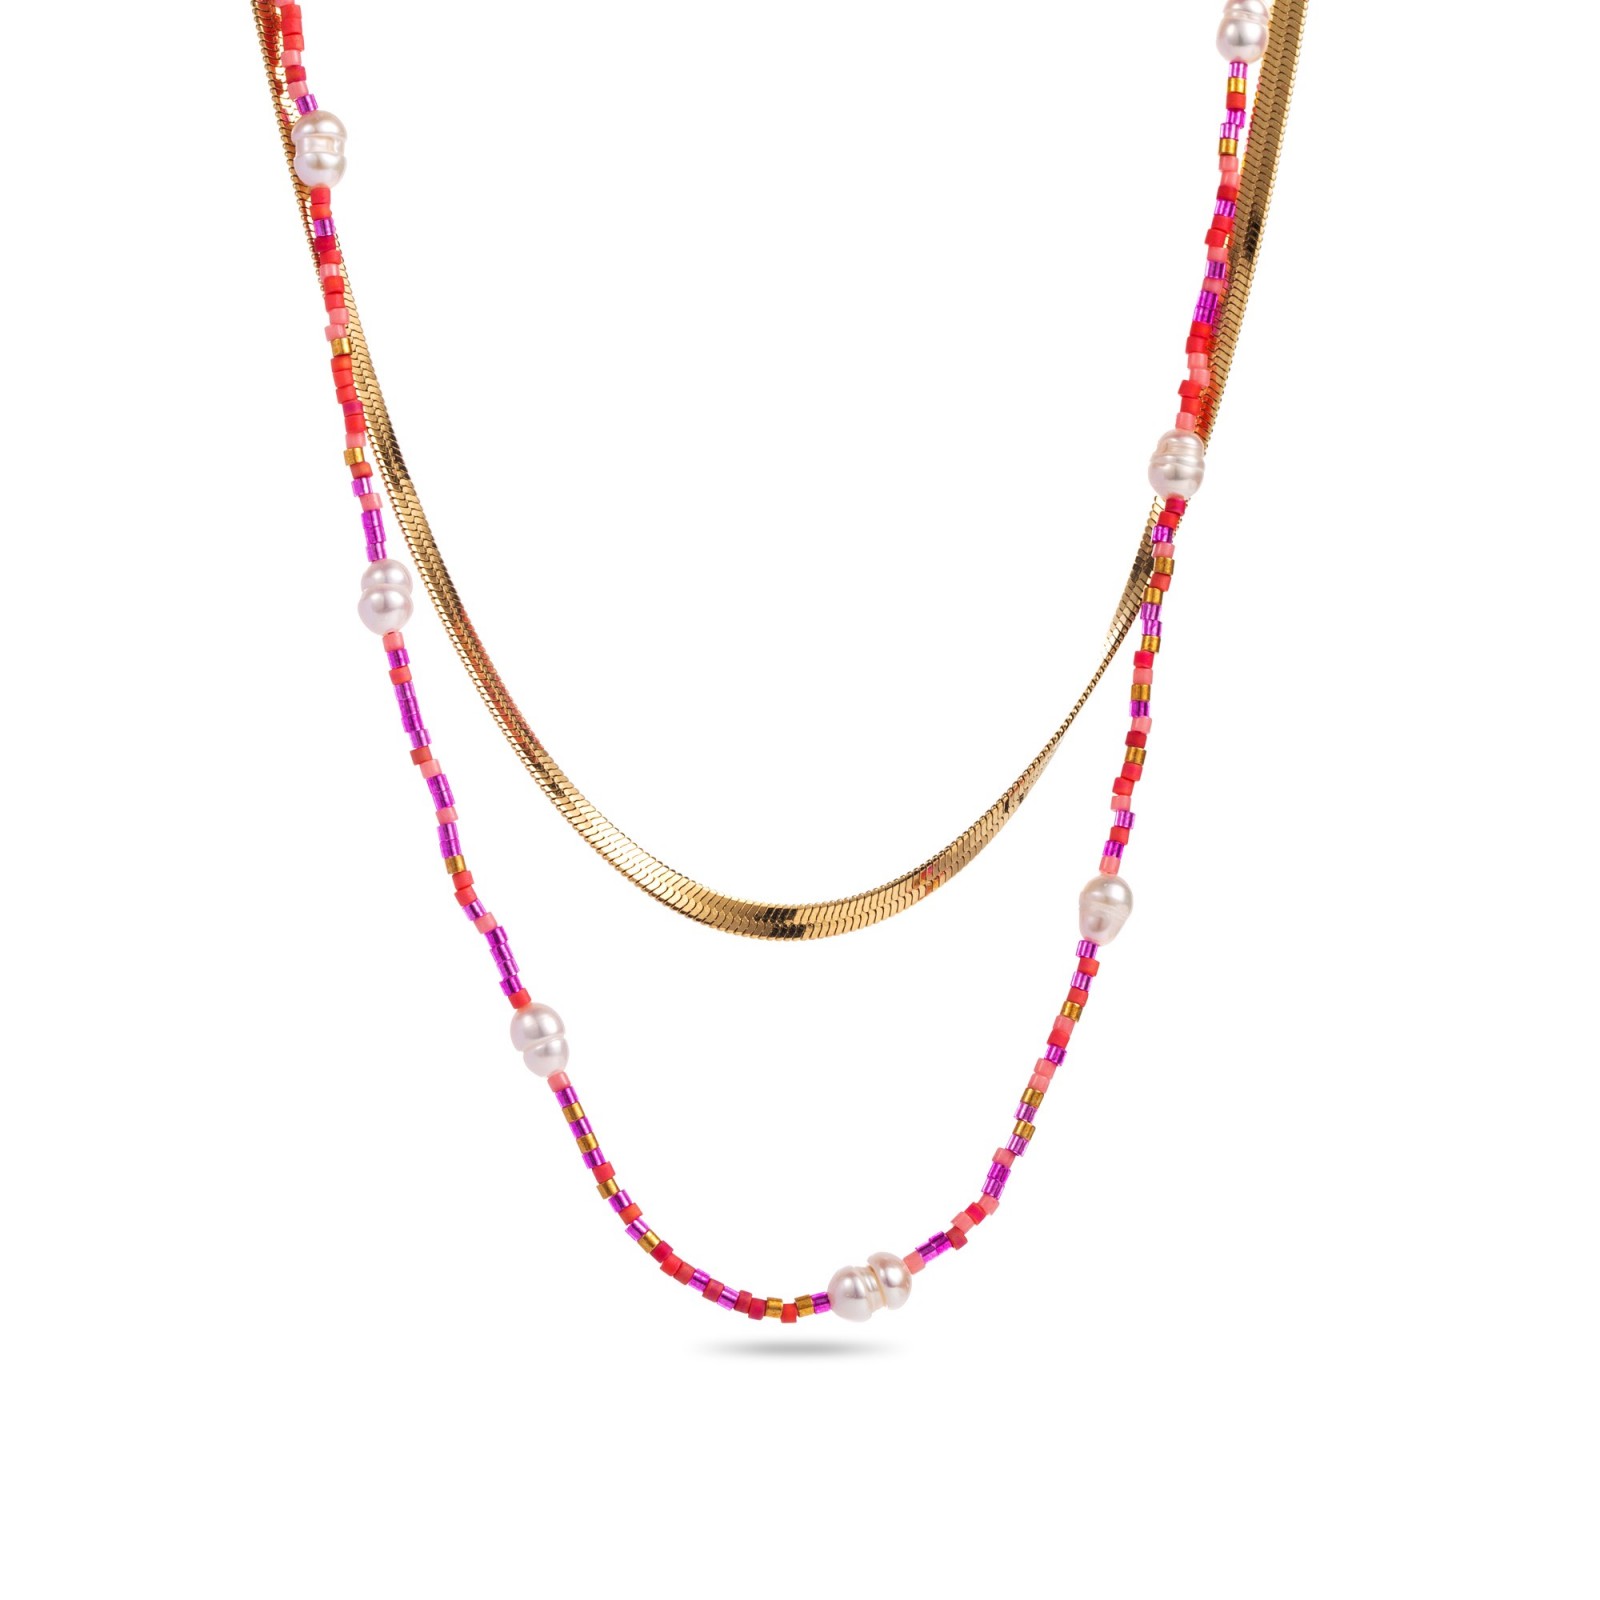 Multirang Necklace with Mother-of-Pearl and Miyuki Color:Fuchsia Pink